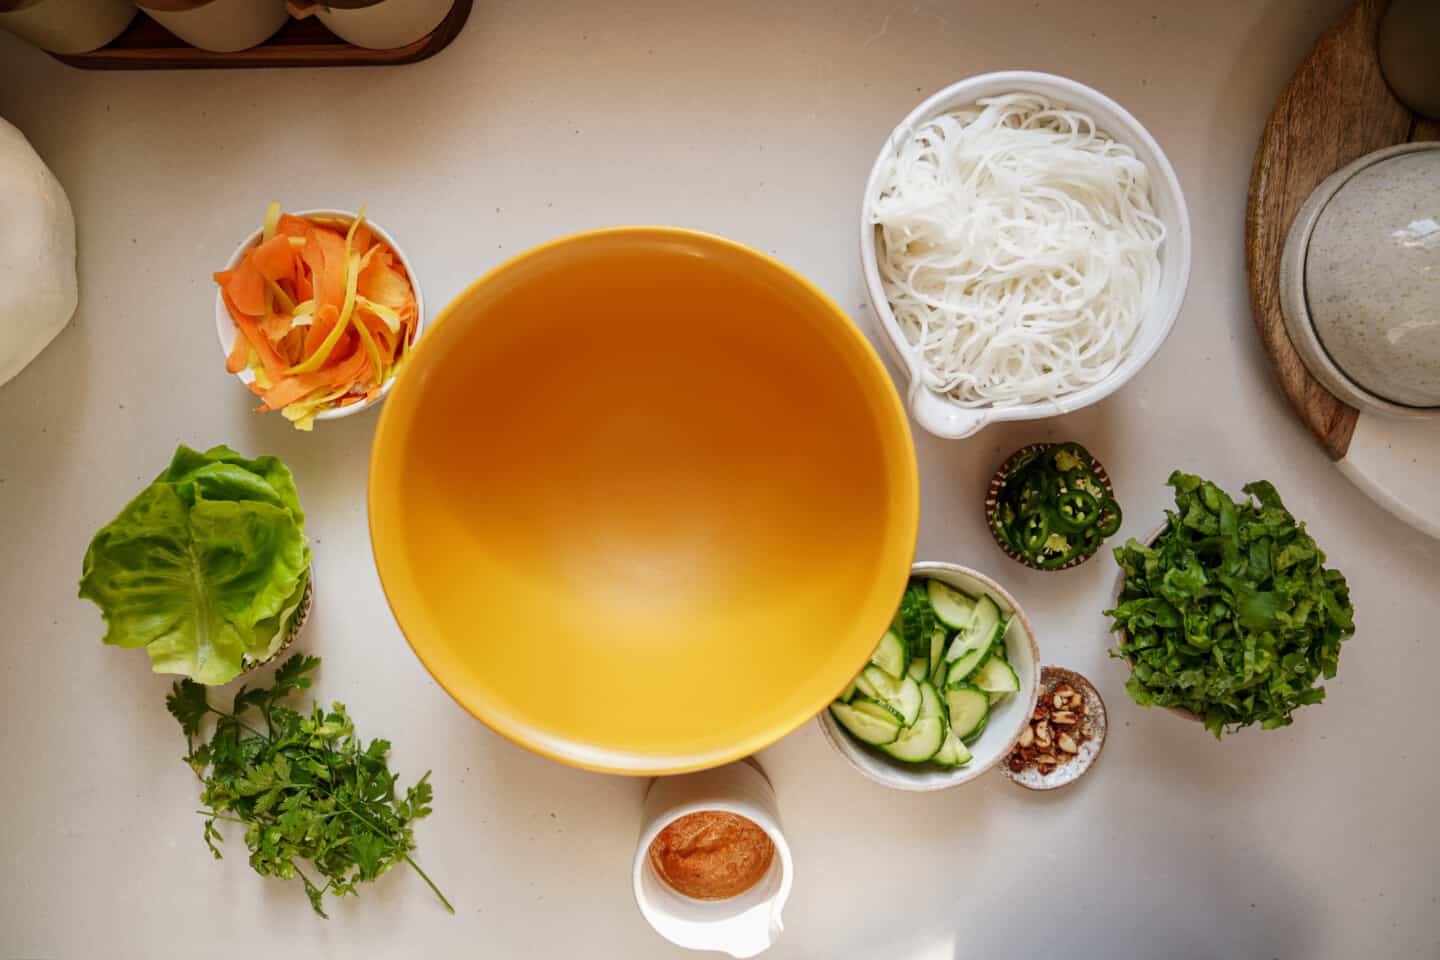 Ingredients around a big bowl for a vermicelli bowl